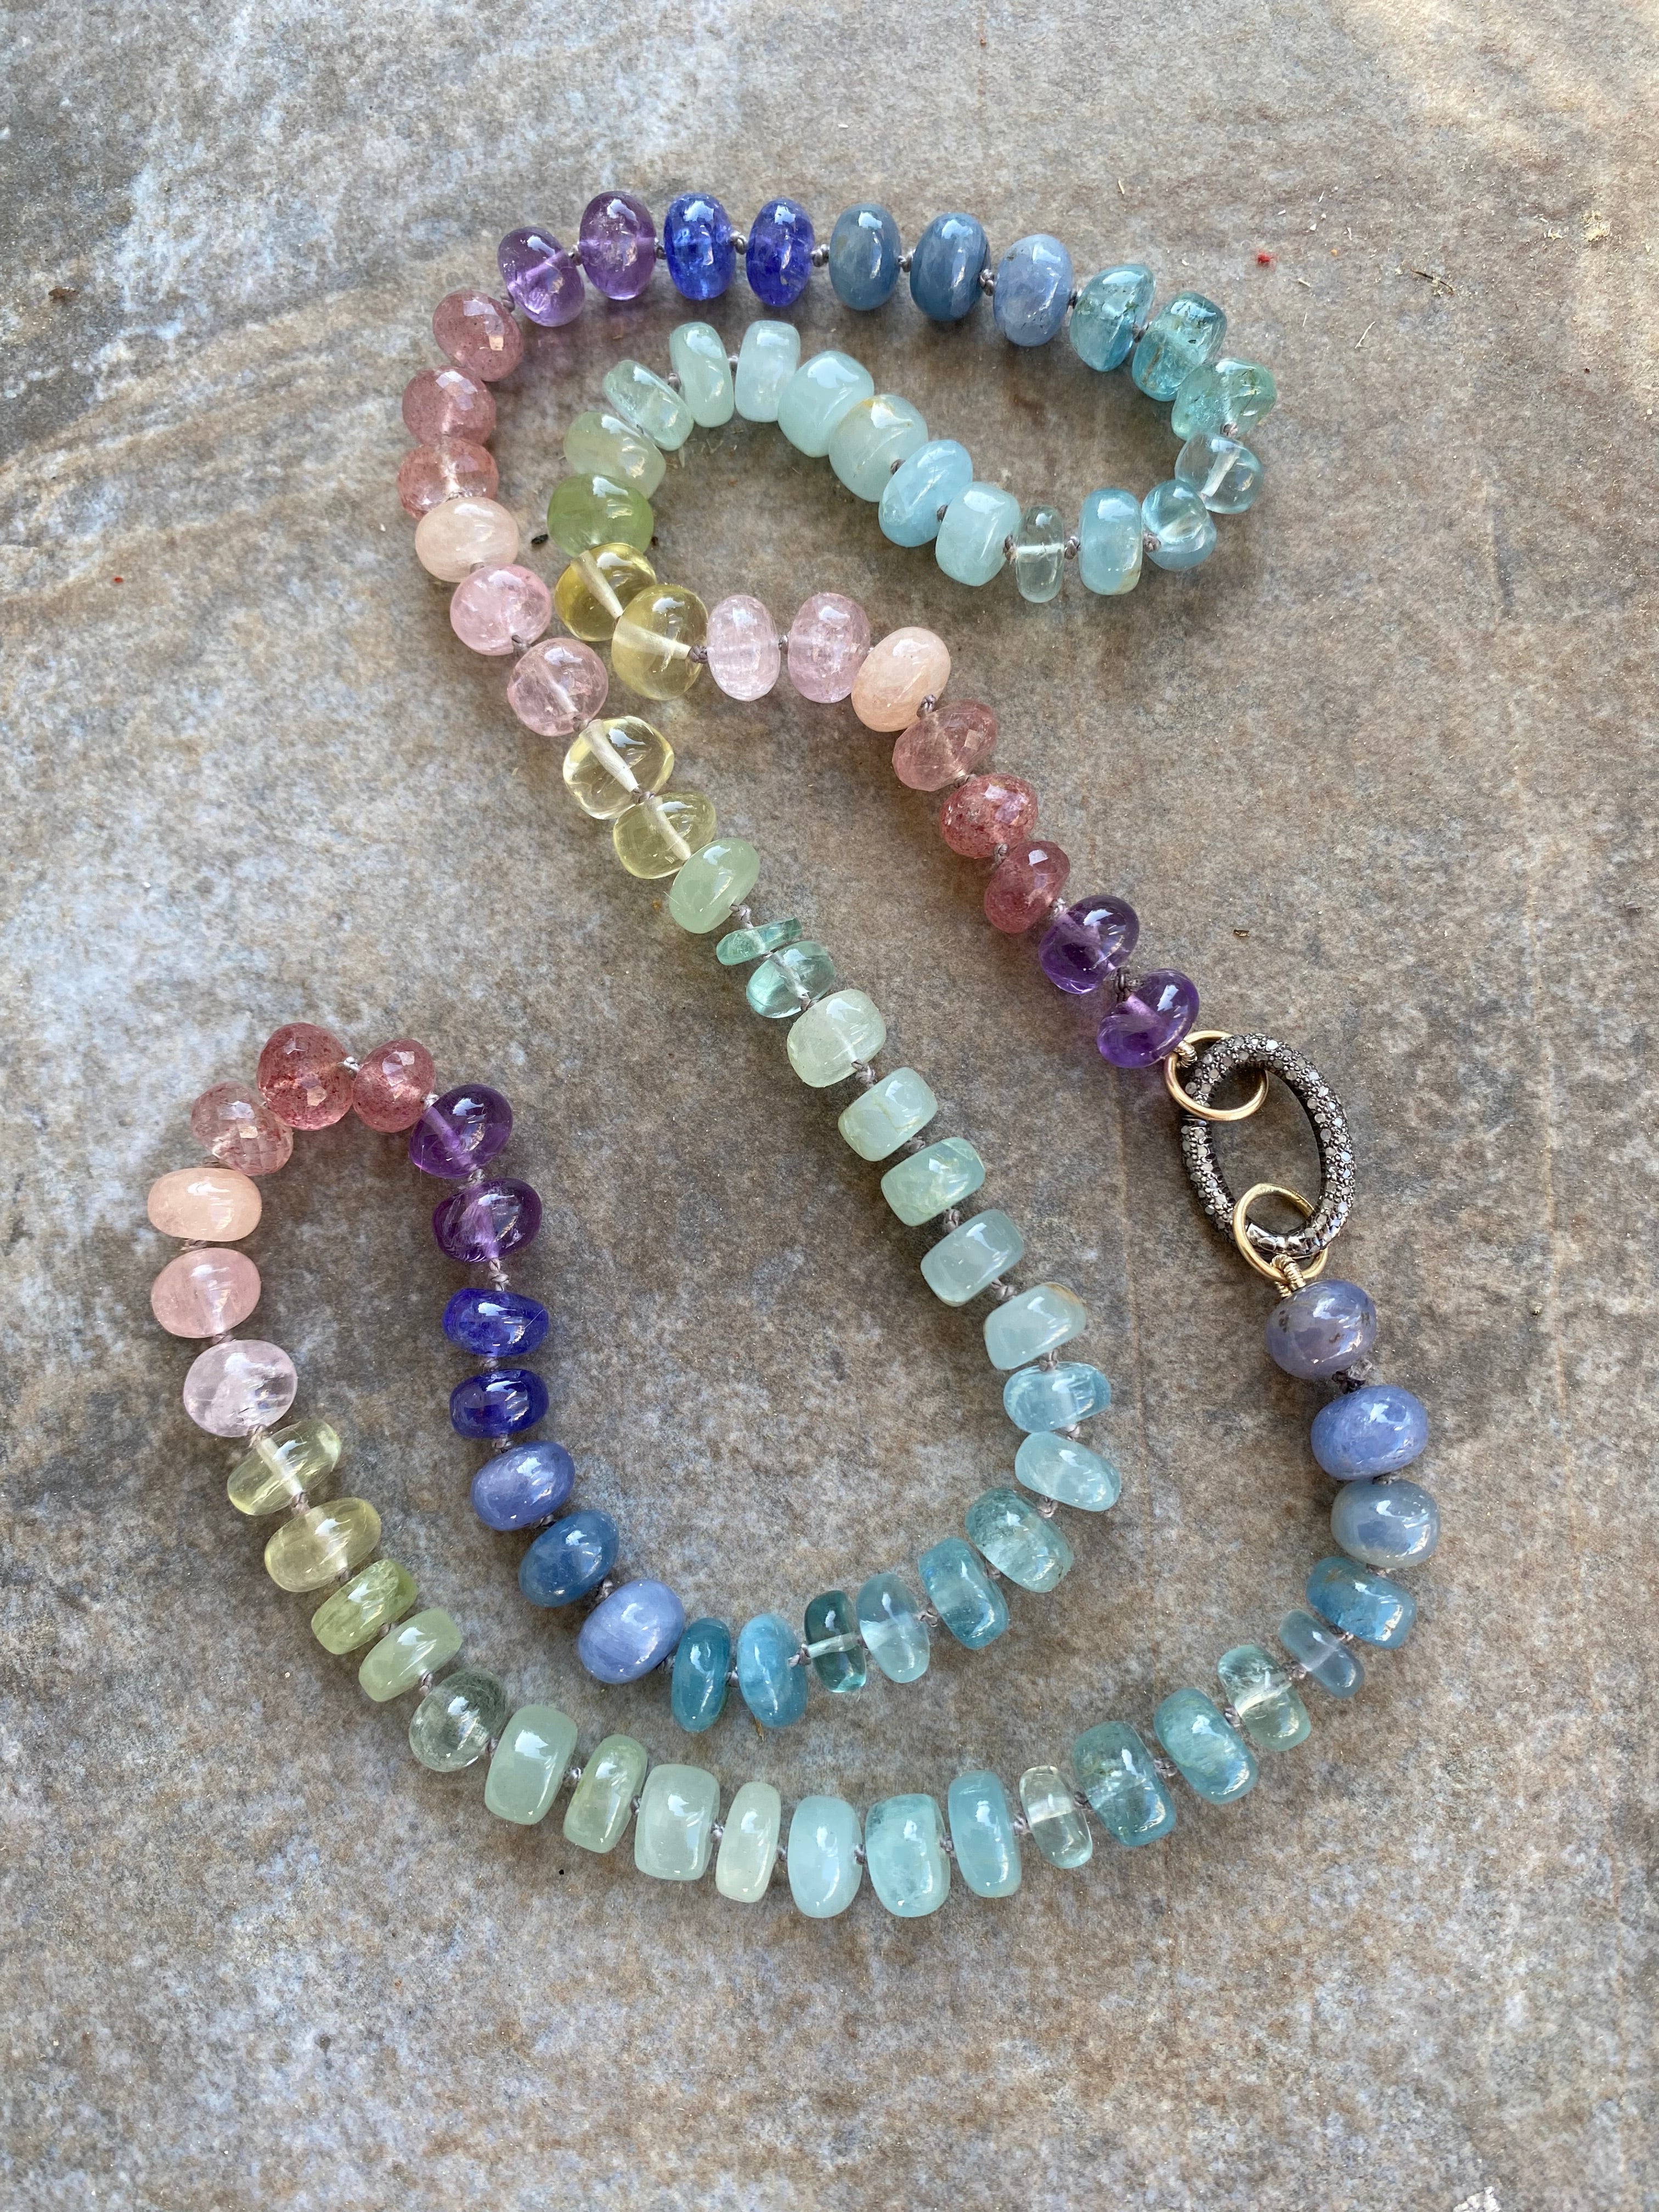 Knotted silk gemstone necklace